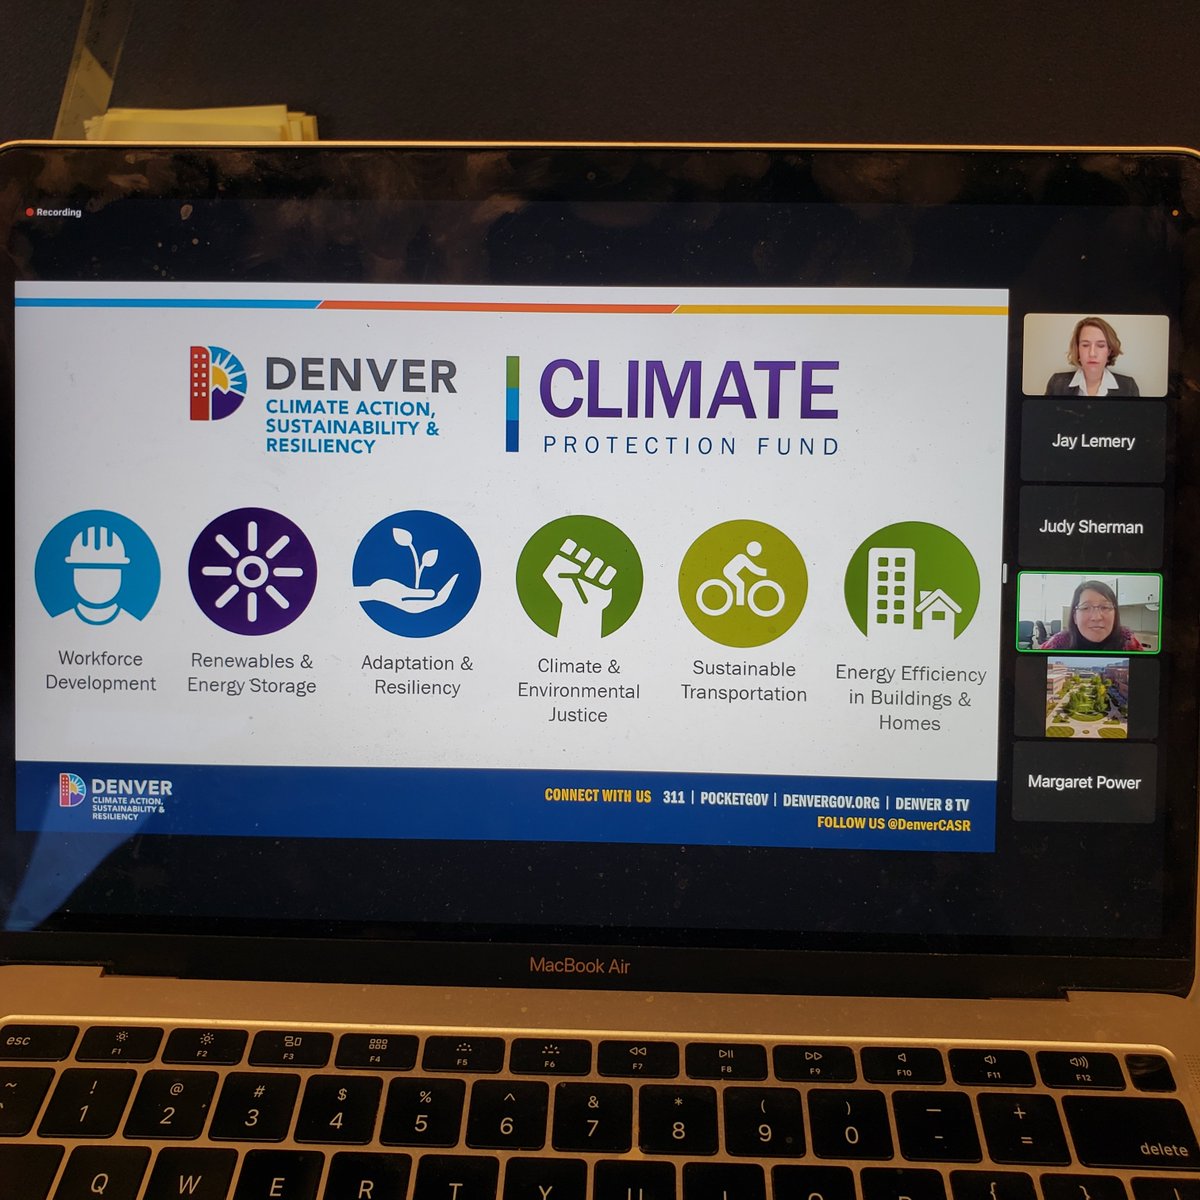 Thank you #GraceRink @DenverCASR for anchoring #ClimateMedicine rounds @CUClimateHealth . Denver voters have transformed the city with its CPF! 🚵‍♀️ 🌞 🚌 👨‍👩‍👧‍👦🔌🌡 @c40cities @MayorHancock @5280Magazine @docsforclimate